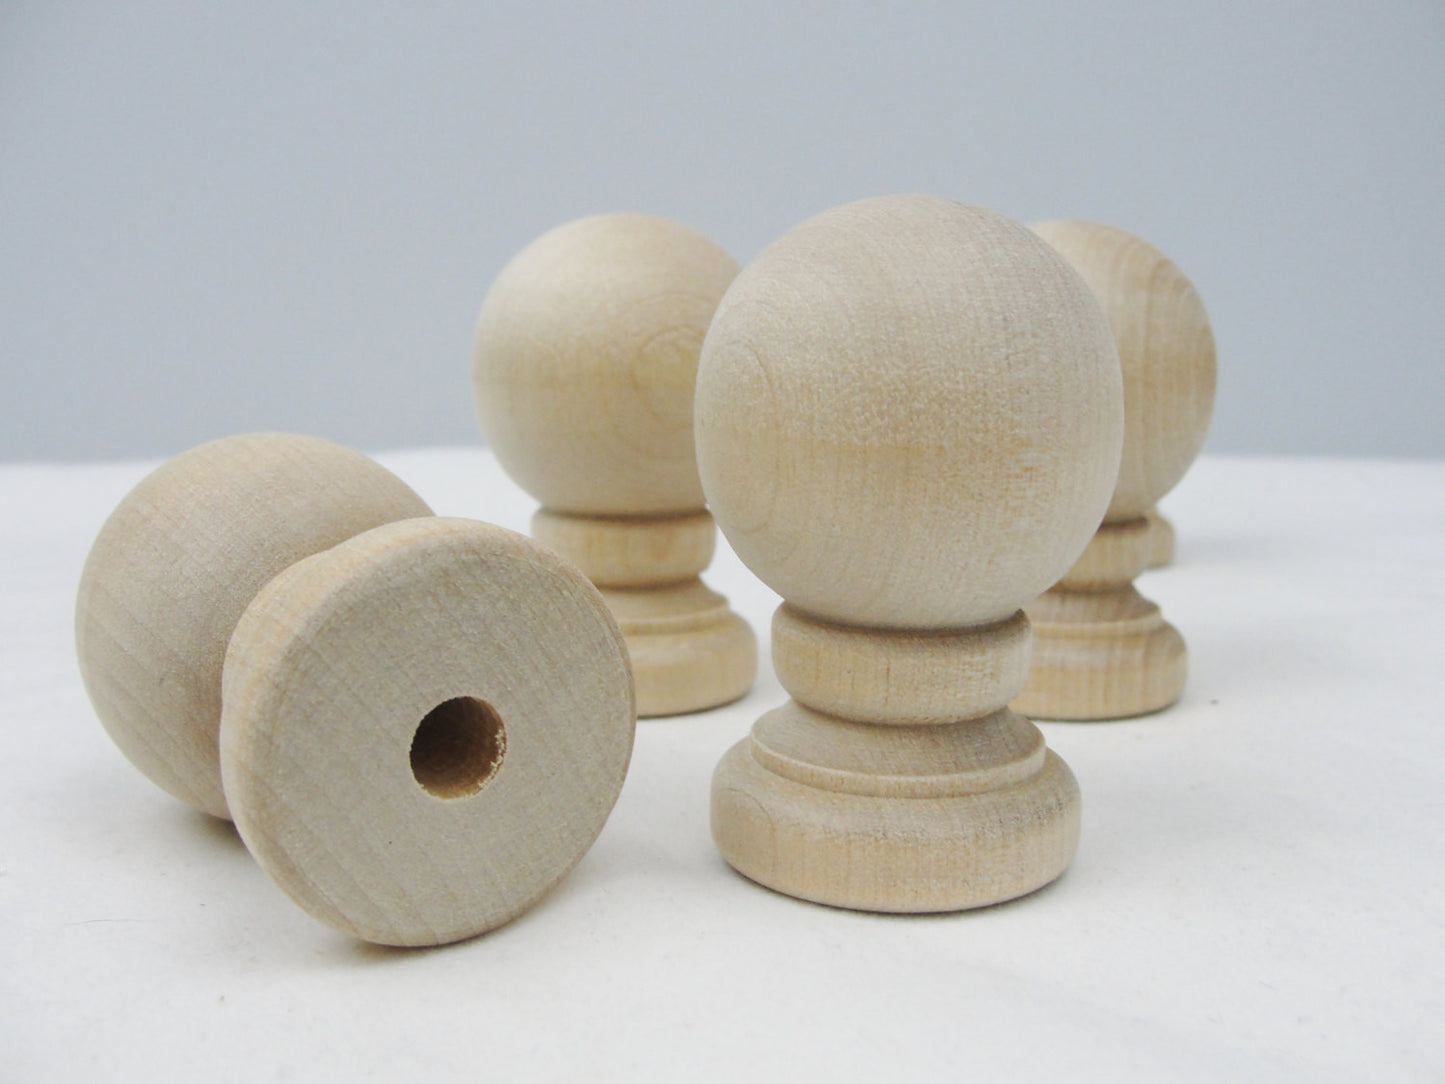 Wooden ball finial set of 5 - Wood parts - Craft Supply House